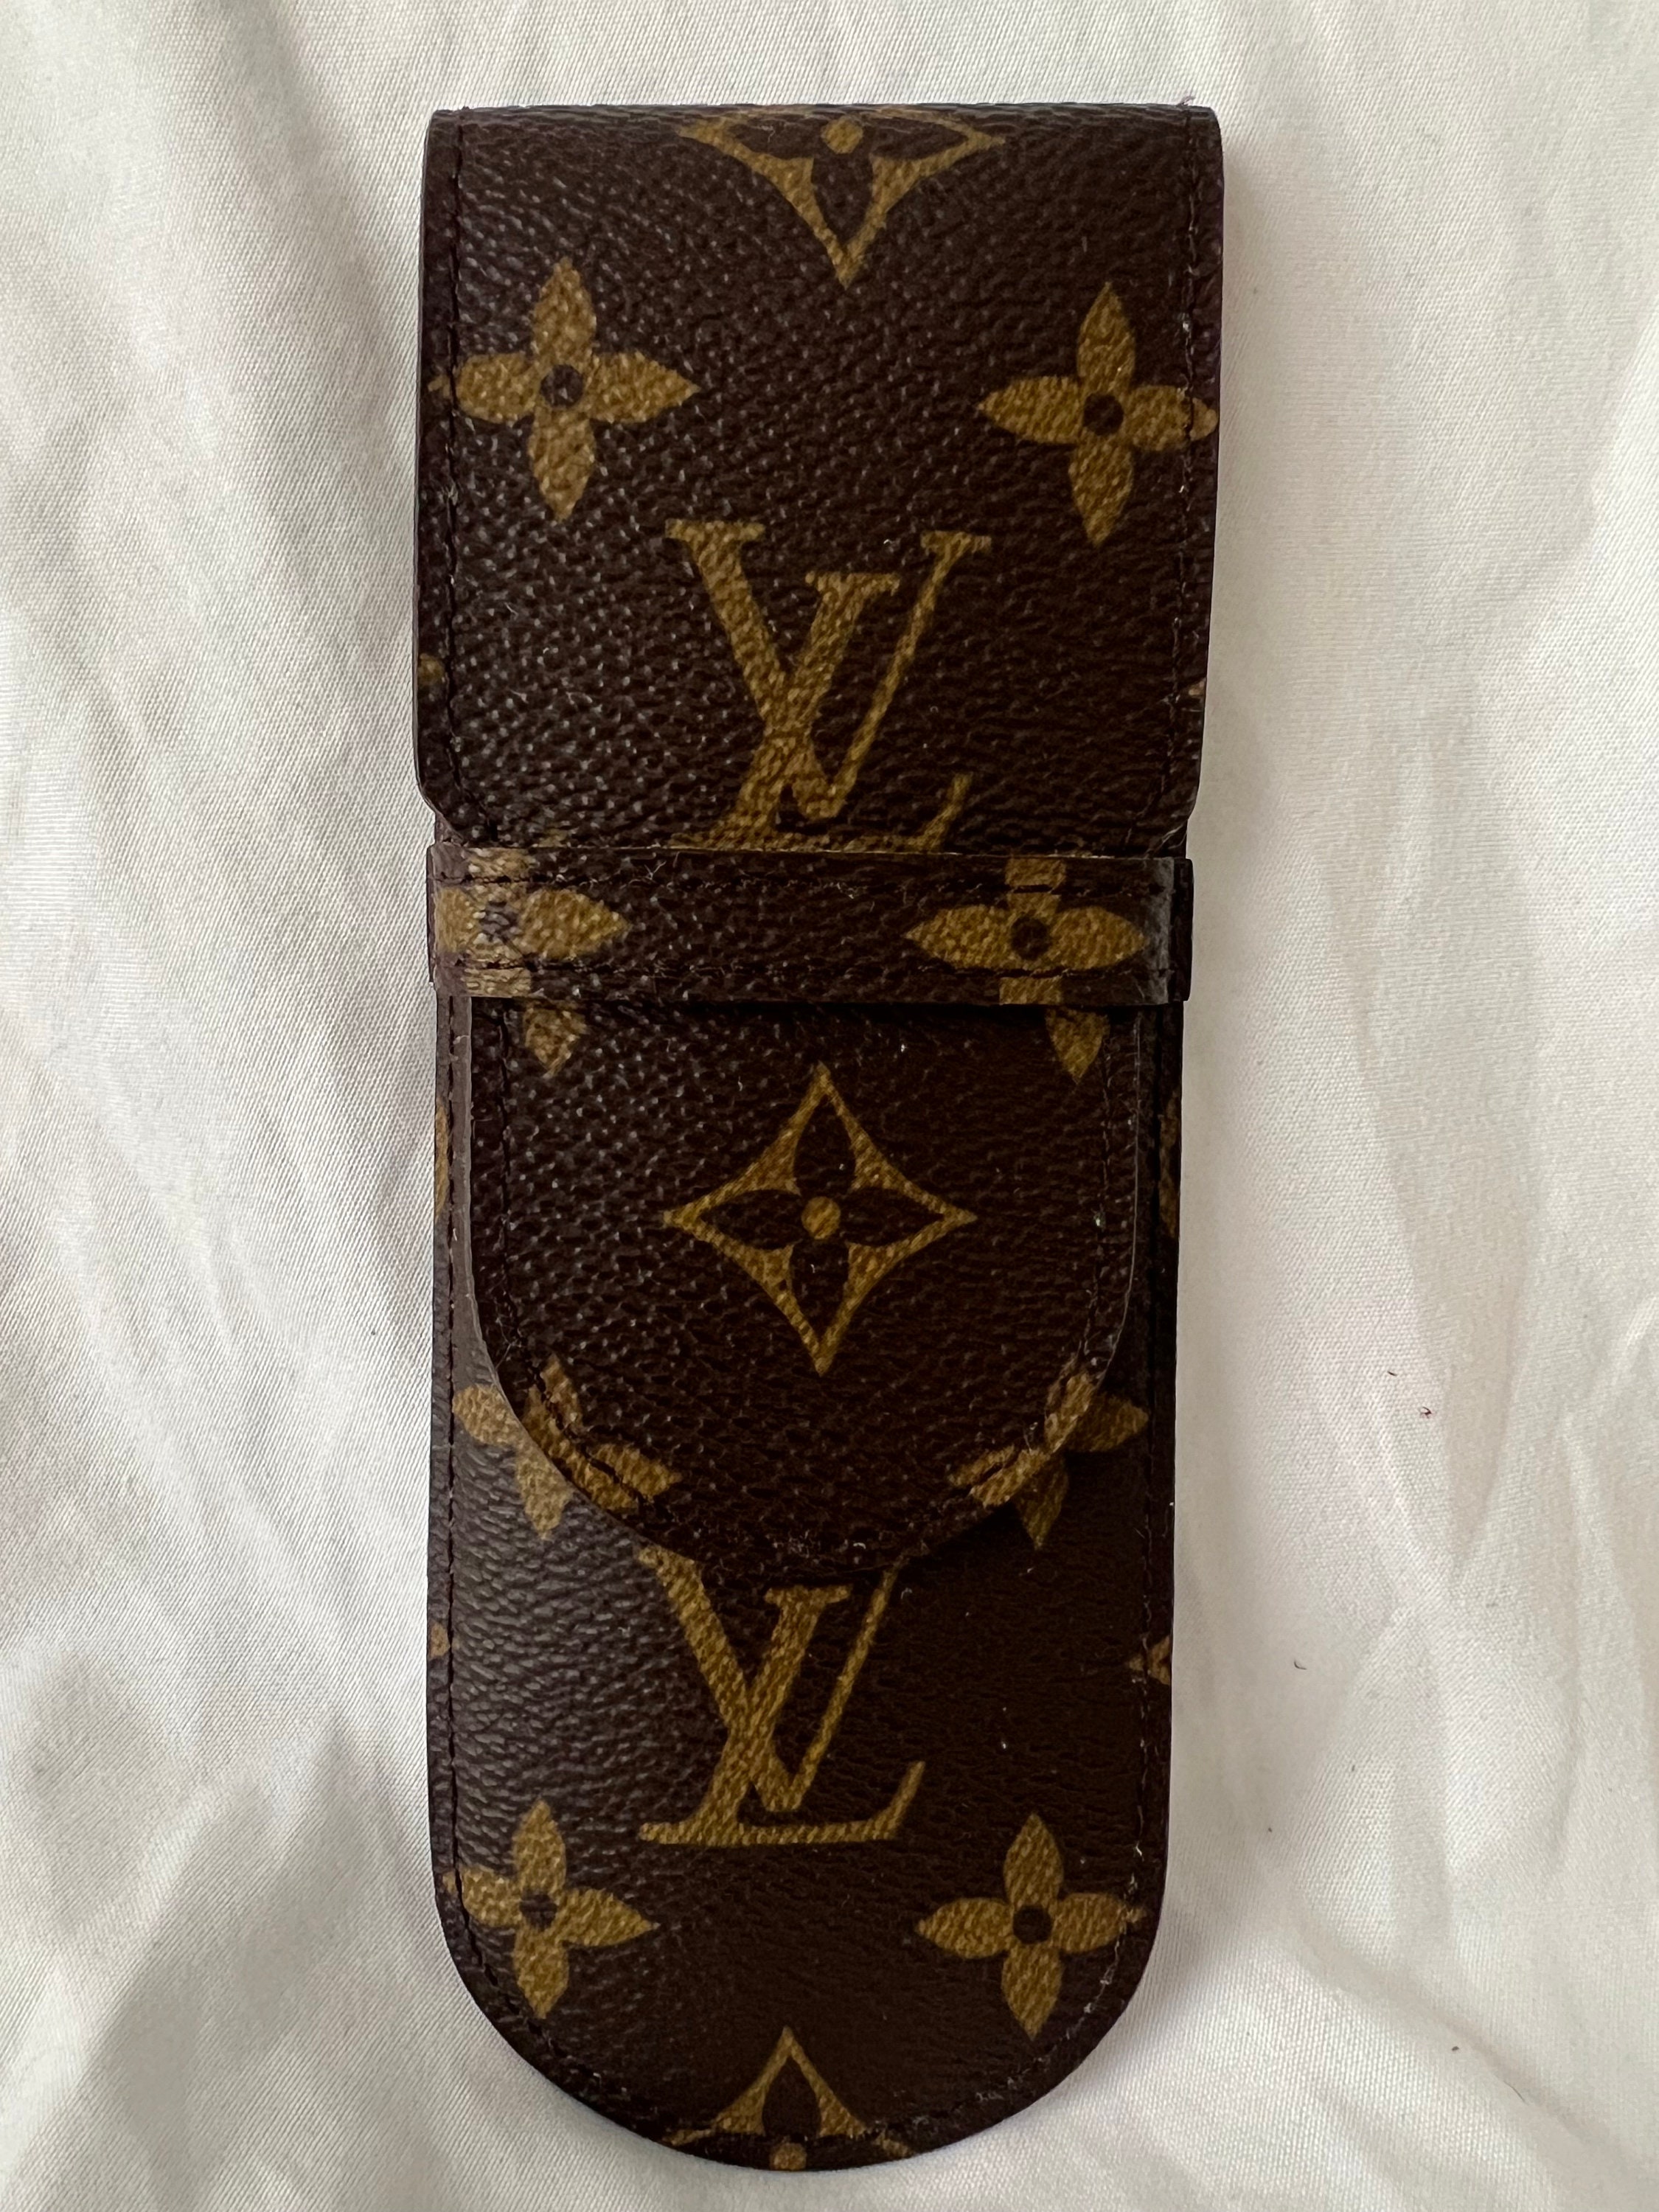 Custom LV Digital Tumbler Set with LV Stationery notebook and ballpoint pen  included